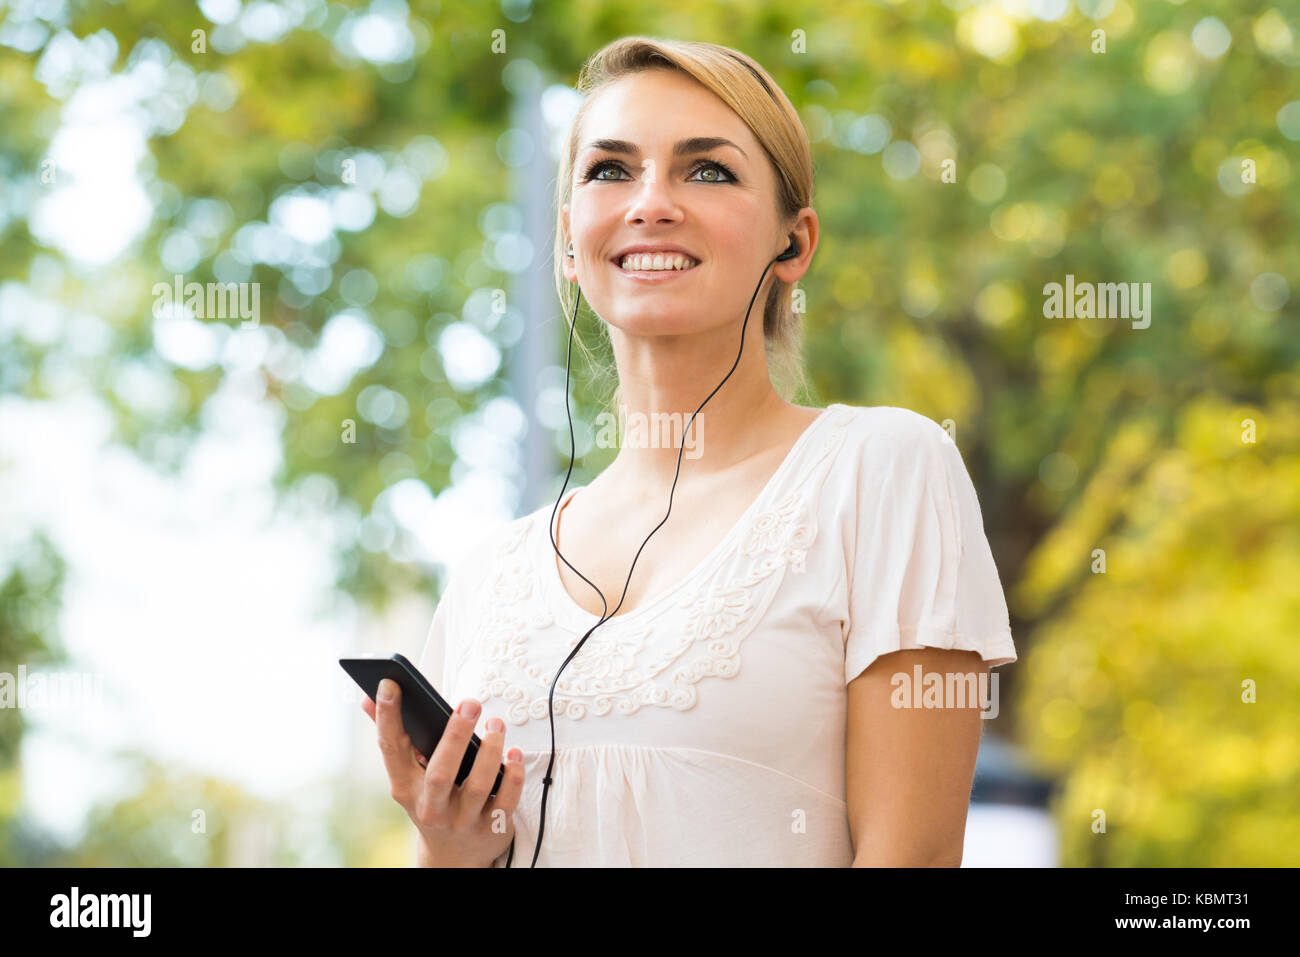 Smiling young woman listening to music through headphones using mobile phone Stock Photo